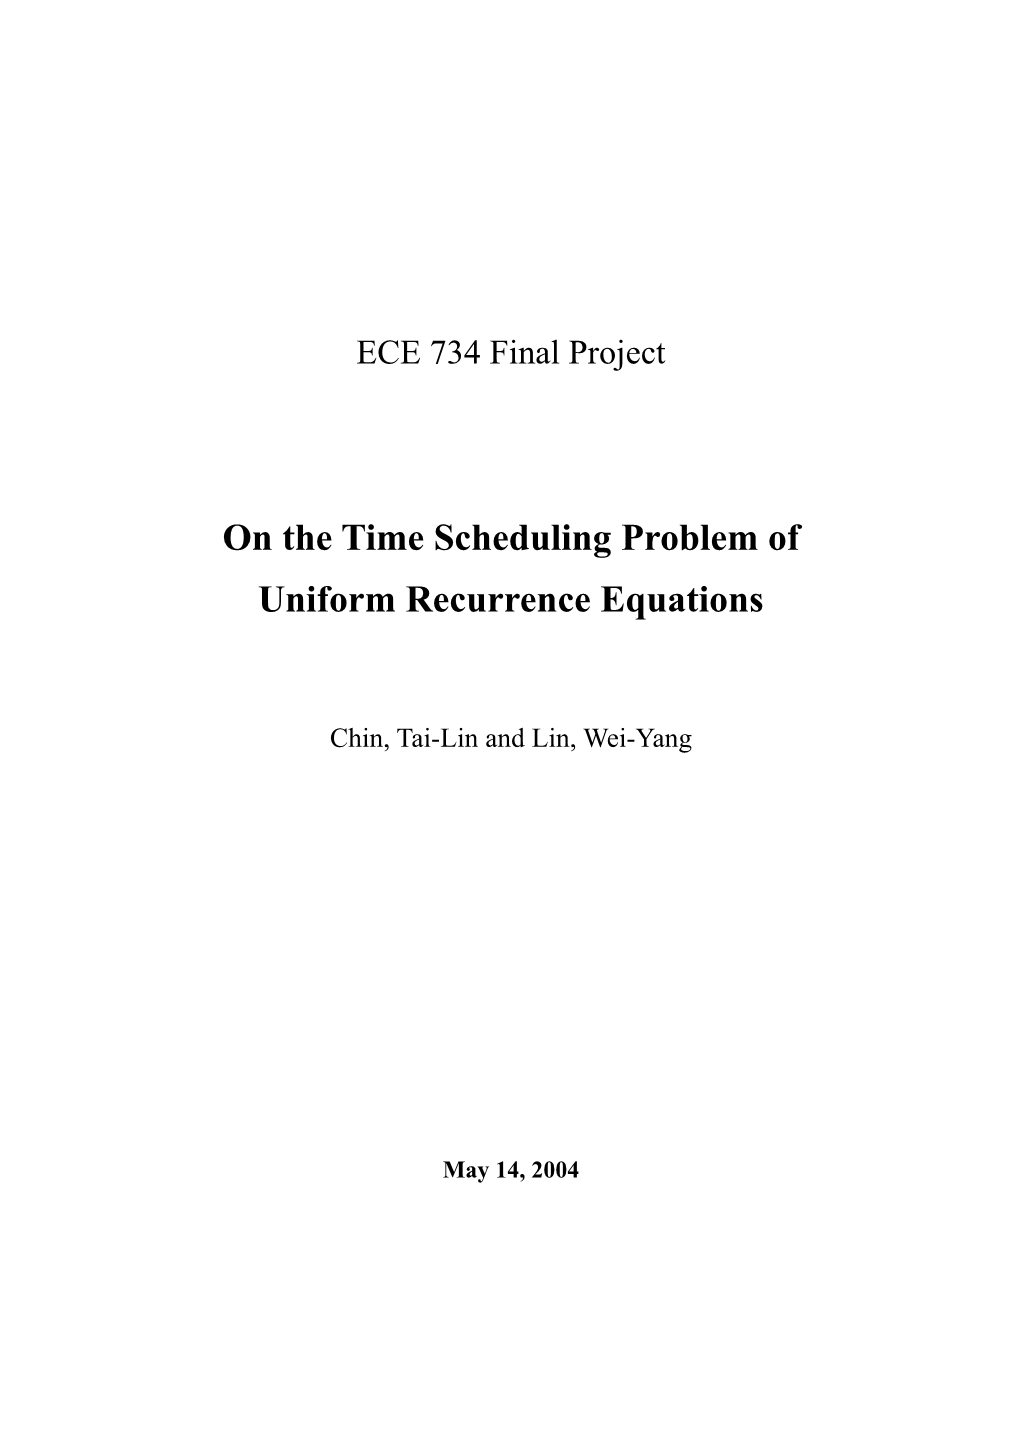 On the Time Scheduling Problem Of